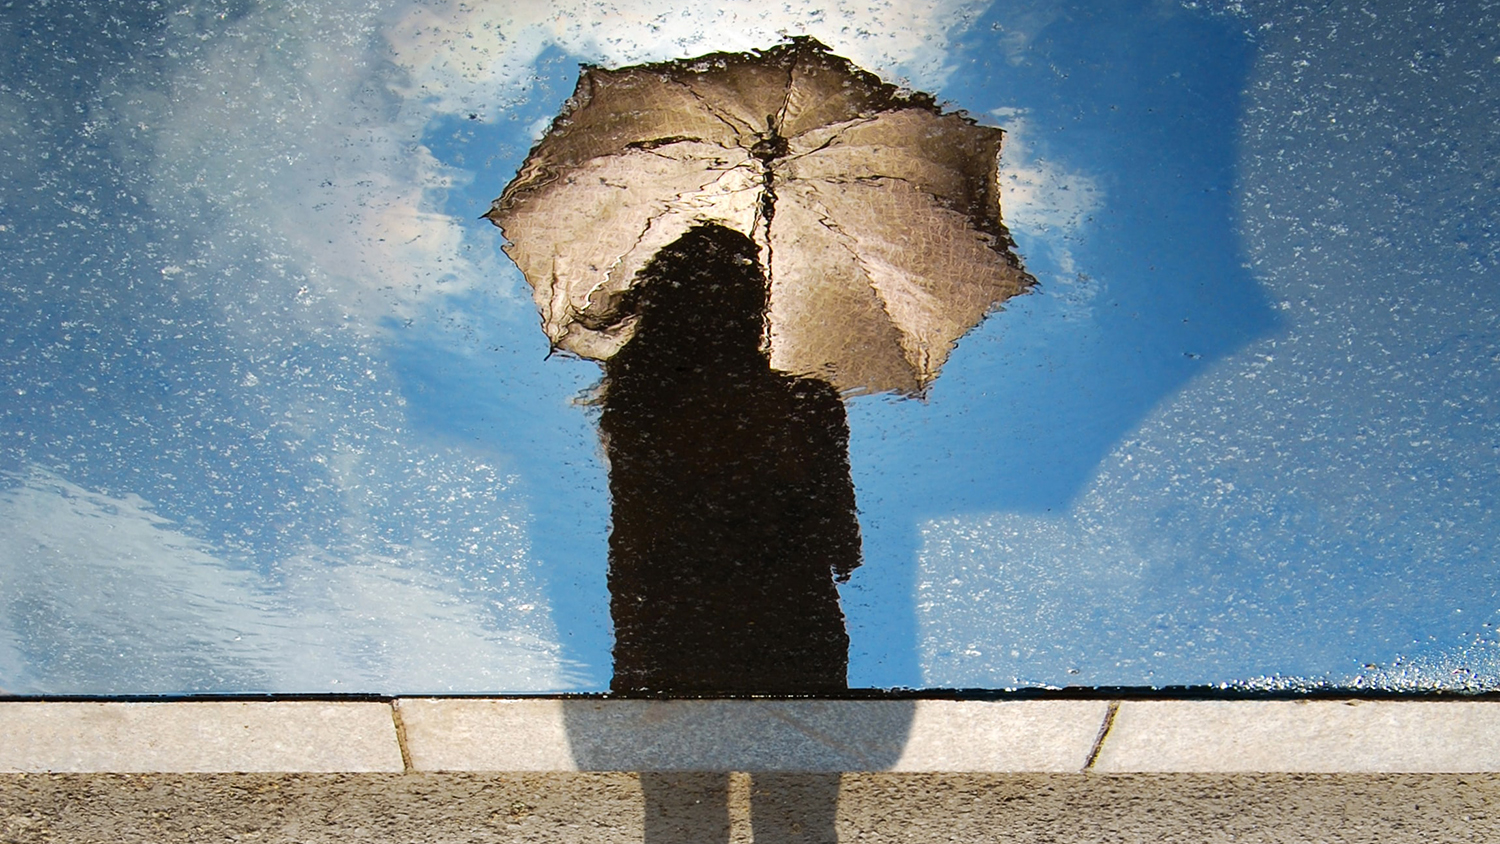 woman with umbrella seen in reflecting water